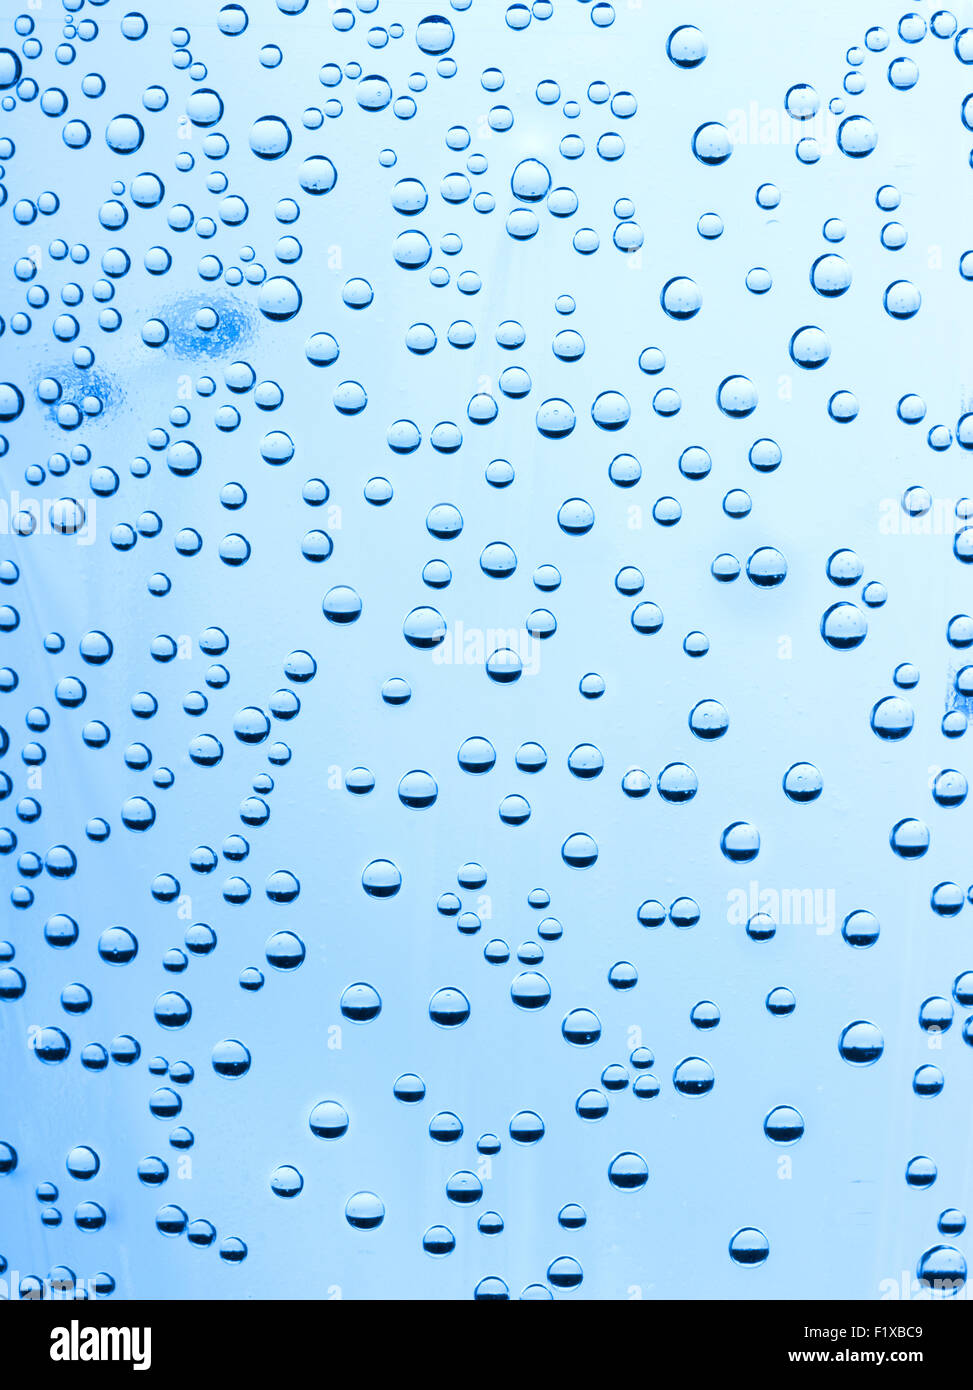 water drops on a blue background. Stock Photo